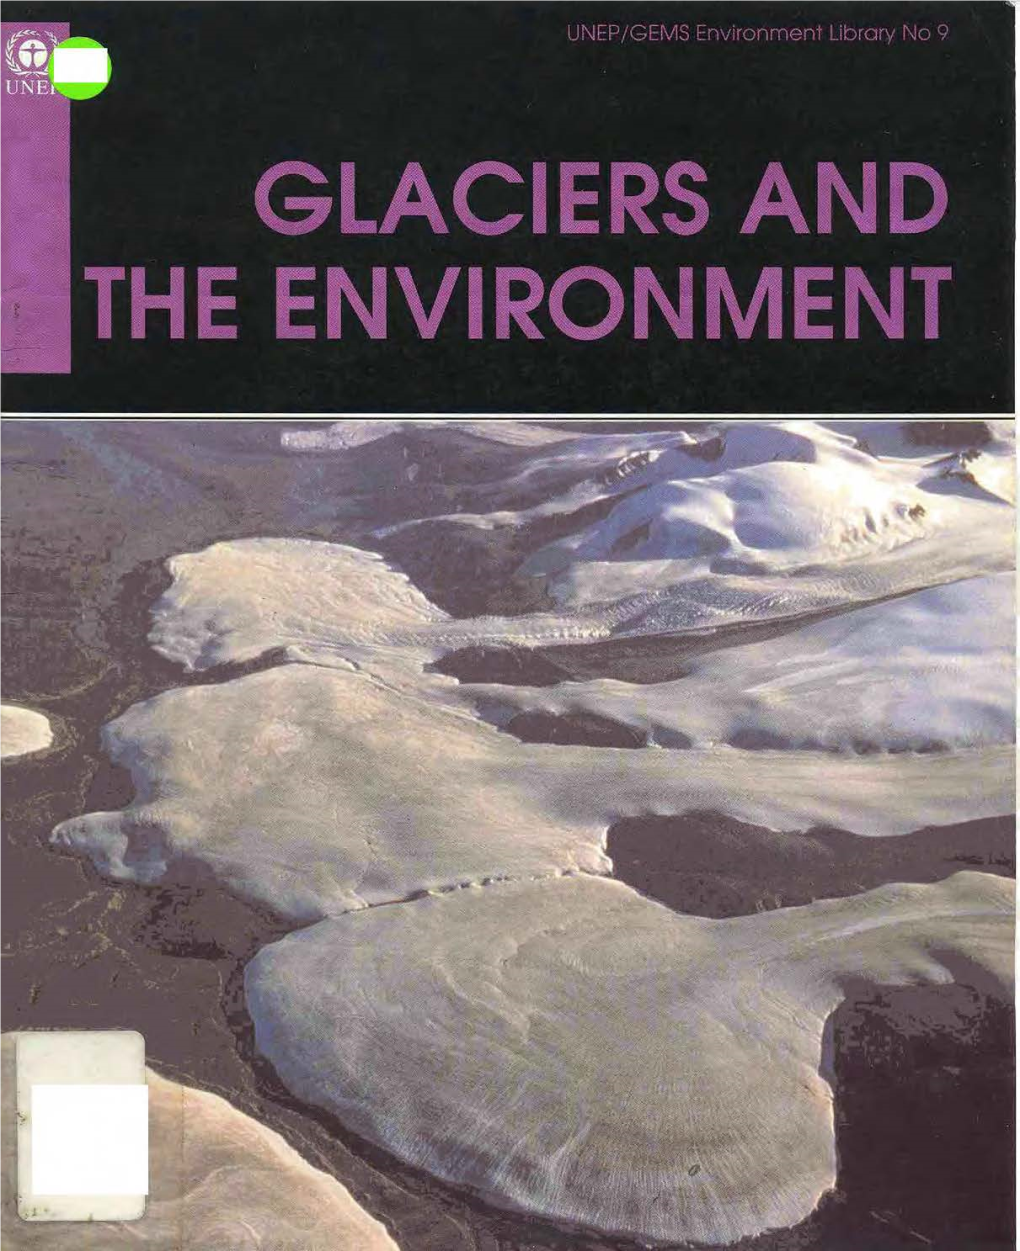 Glaciers and the Environment Nairobi, UNEP, 1992 (UNEP/GEMS Environment Library No 9)